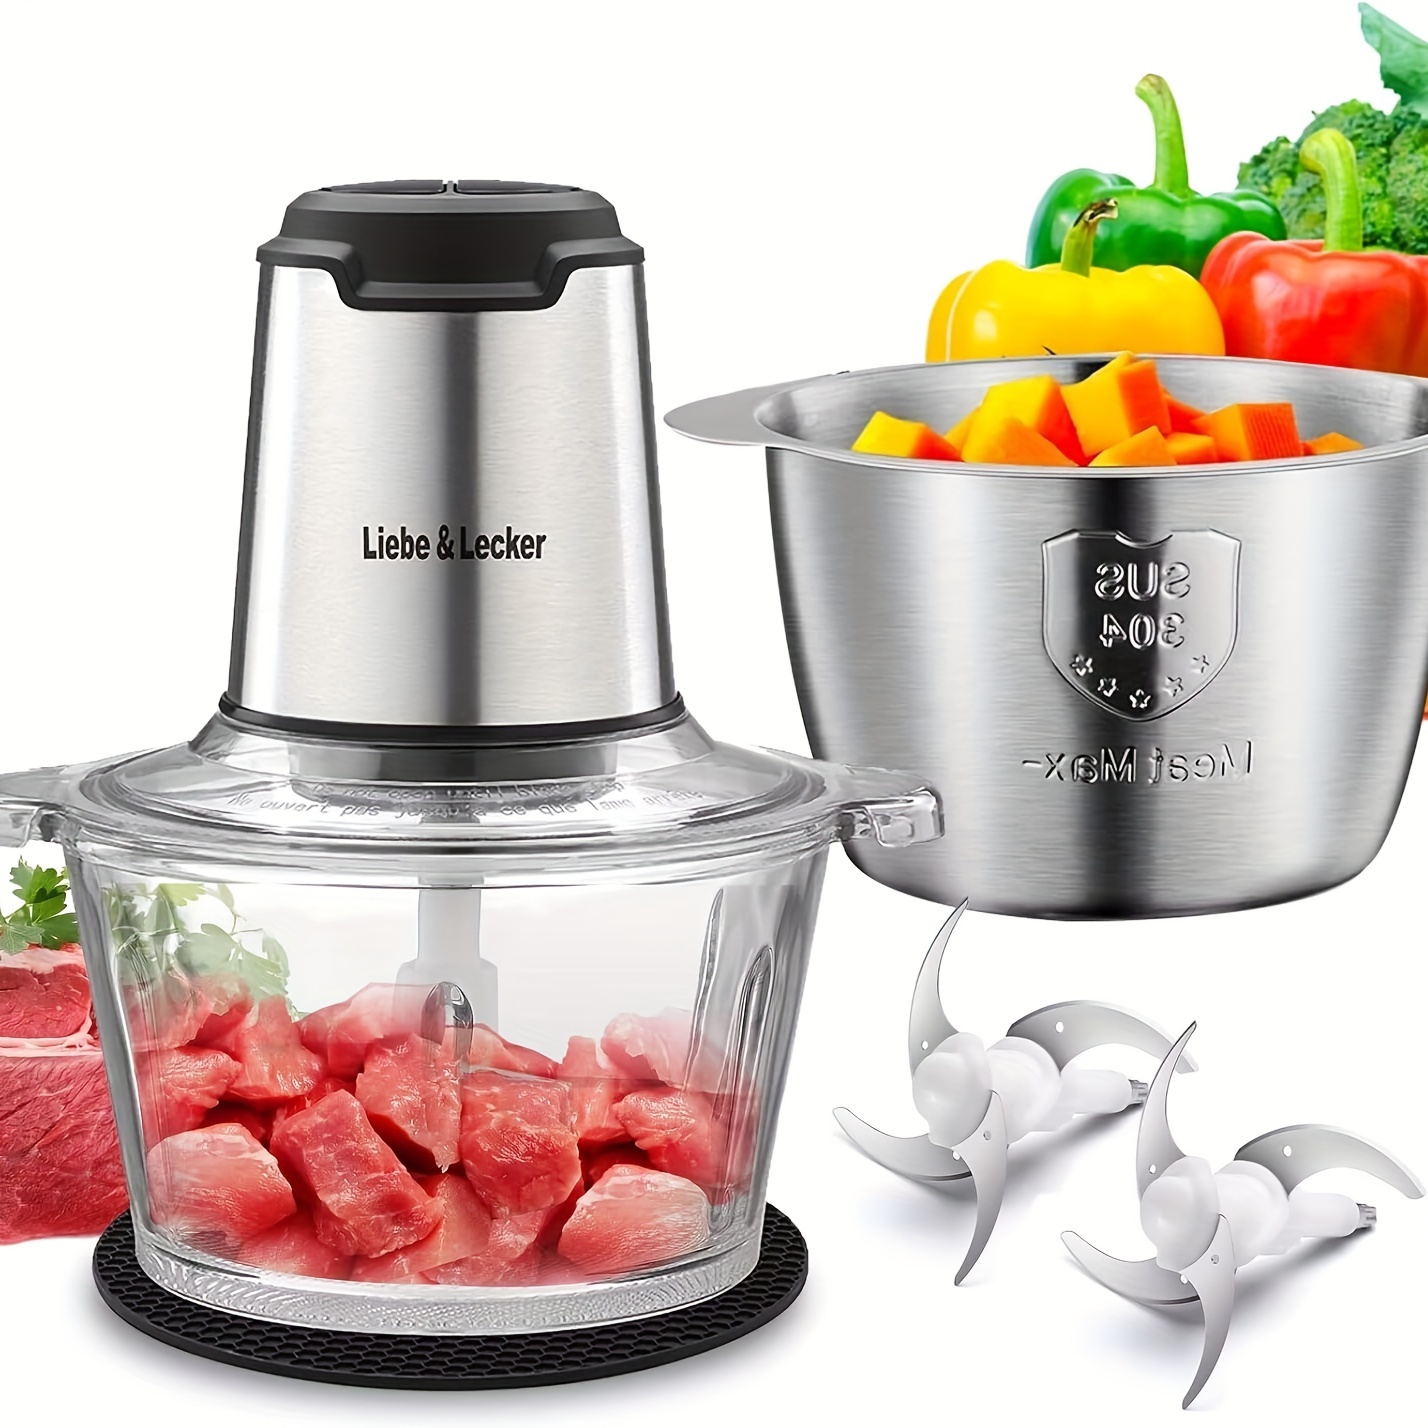 

Liebe&lecker Food Processor, Meat Grinder With 2 Bowls 8 Cup And 8 Cup, Food Chopper Electric Vegetable Chopper With 4 Large Sharp Blades For Fruits, Meat, Vegetables, Baby Food, Nuts, 2 Speed